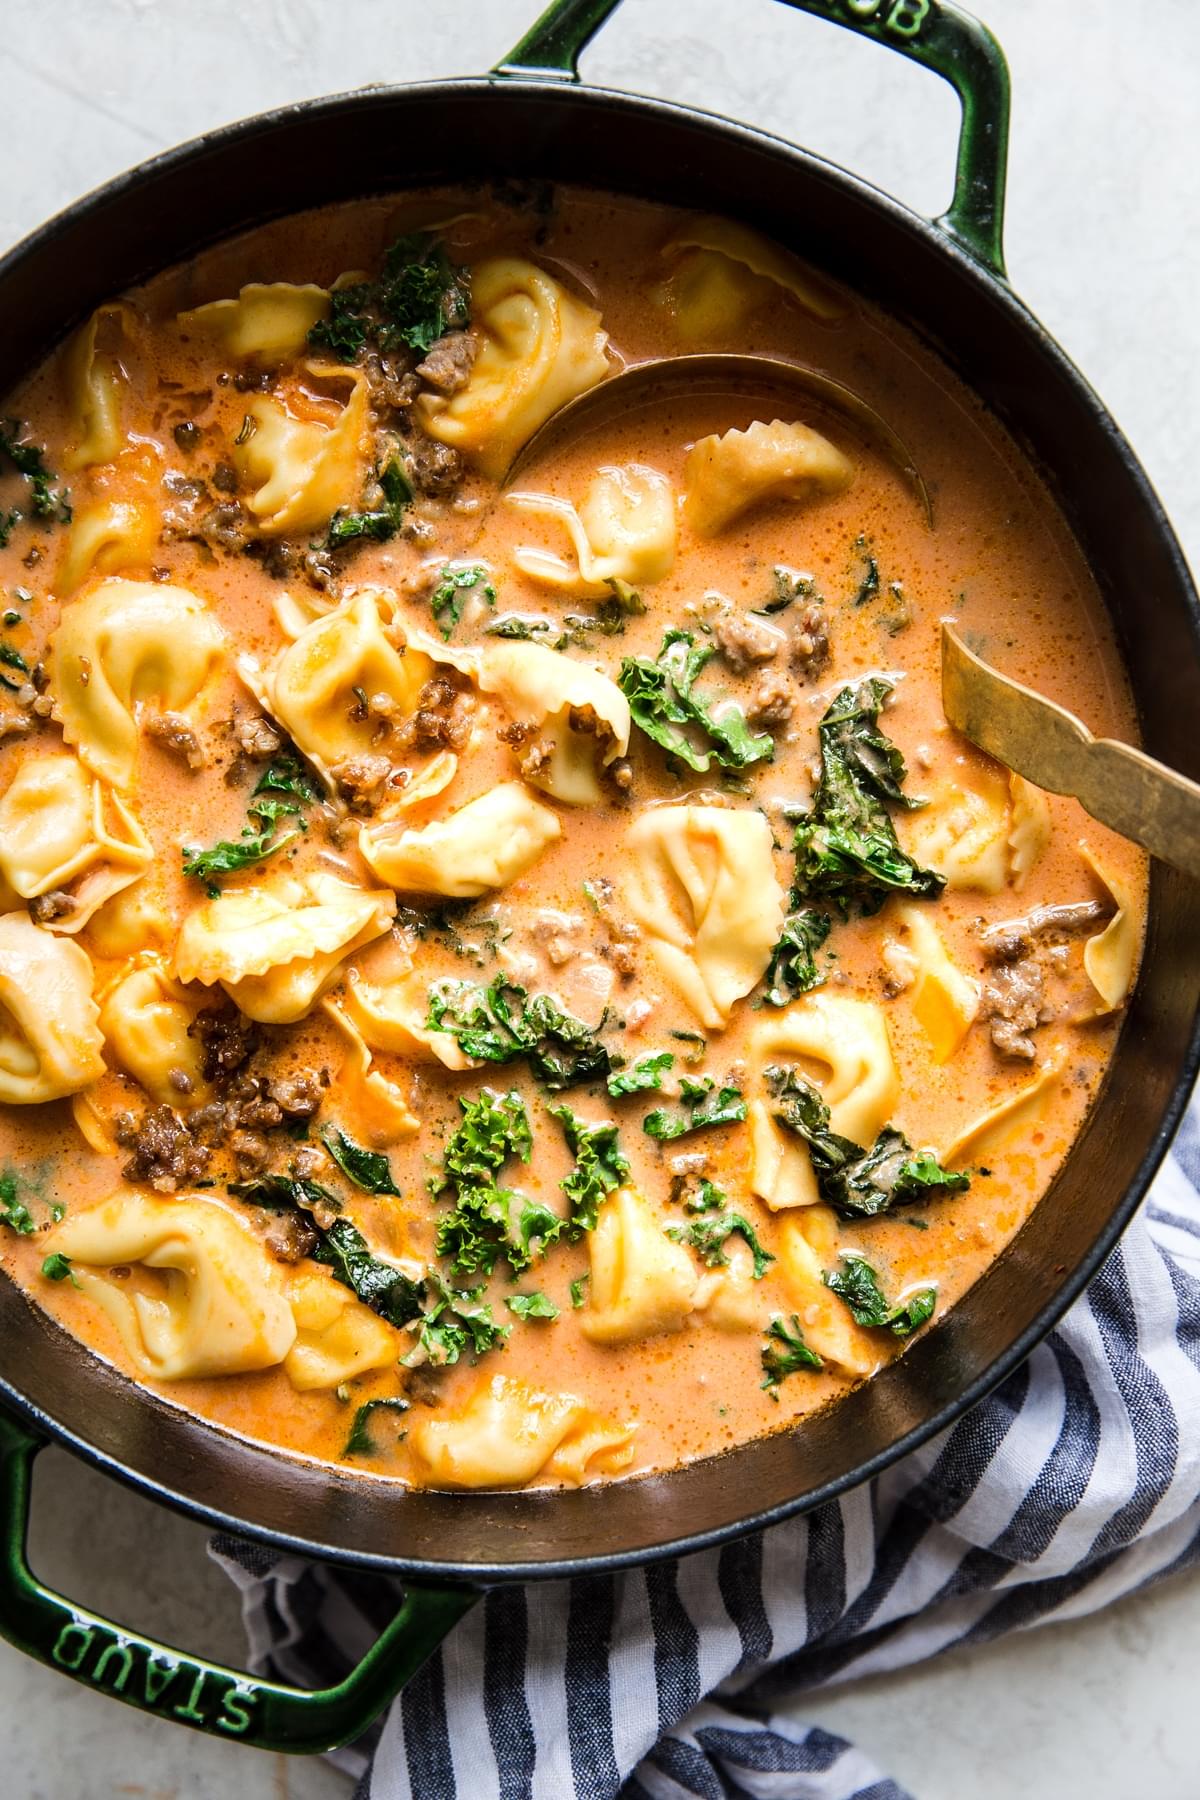 Creamy Tomato Tortellini Soup With Sausage And Kale in a pot with a ladle.